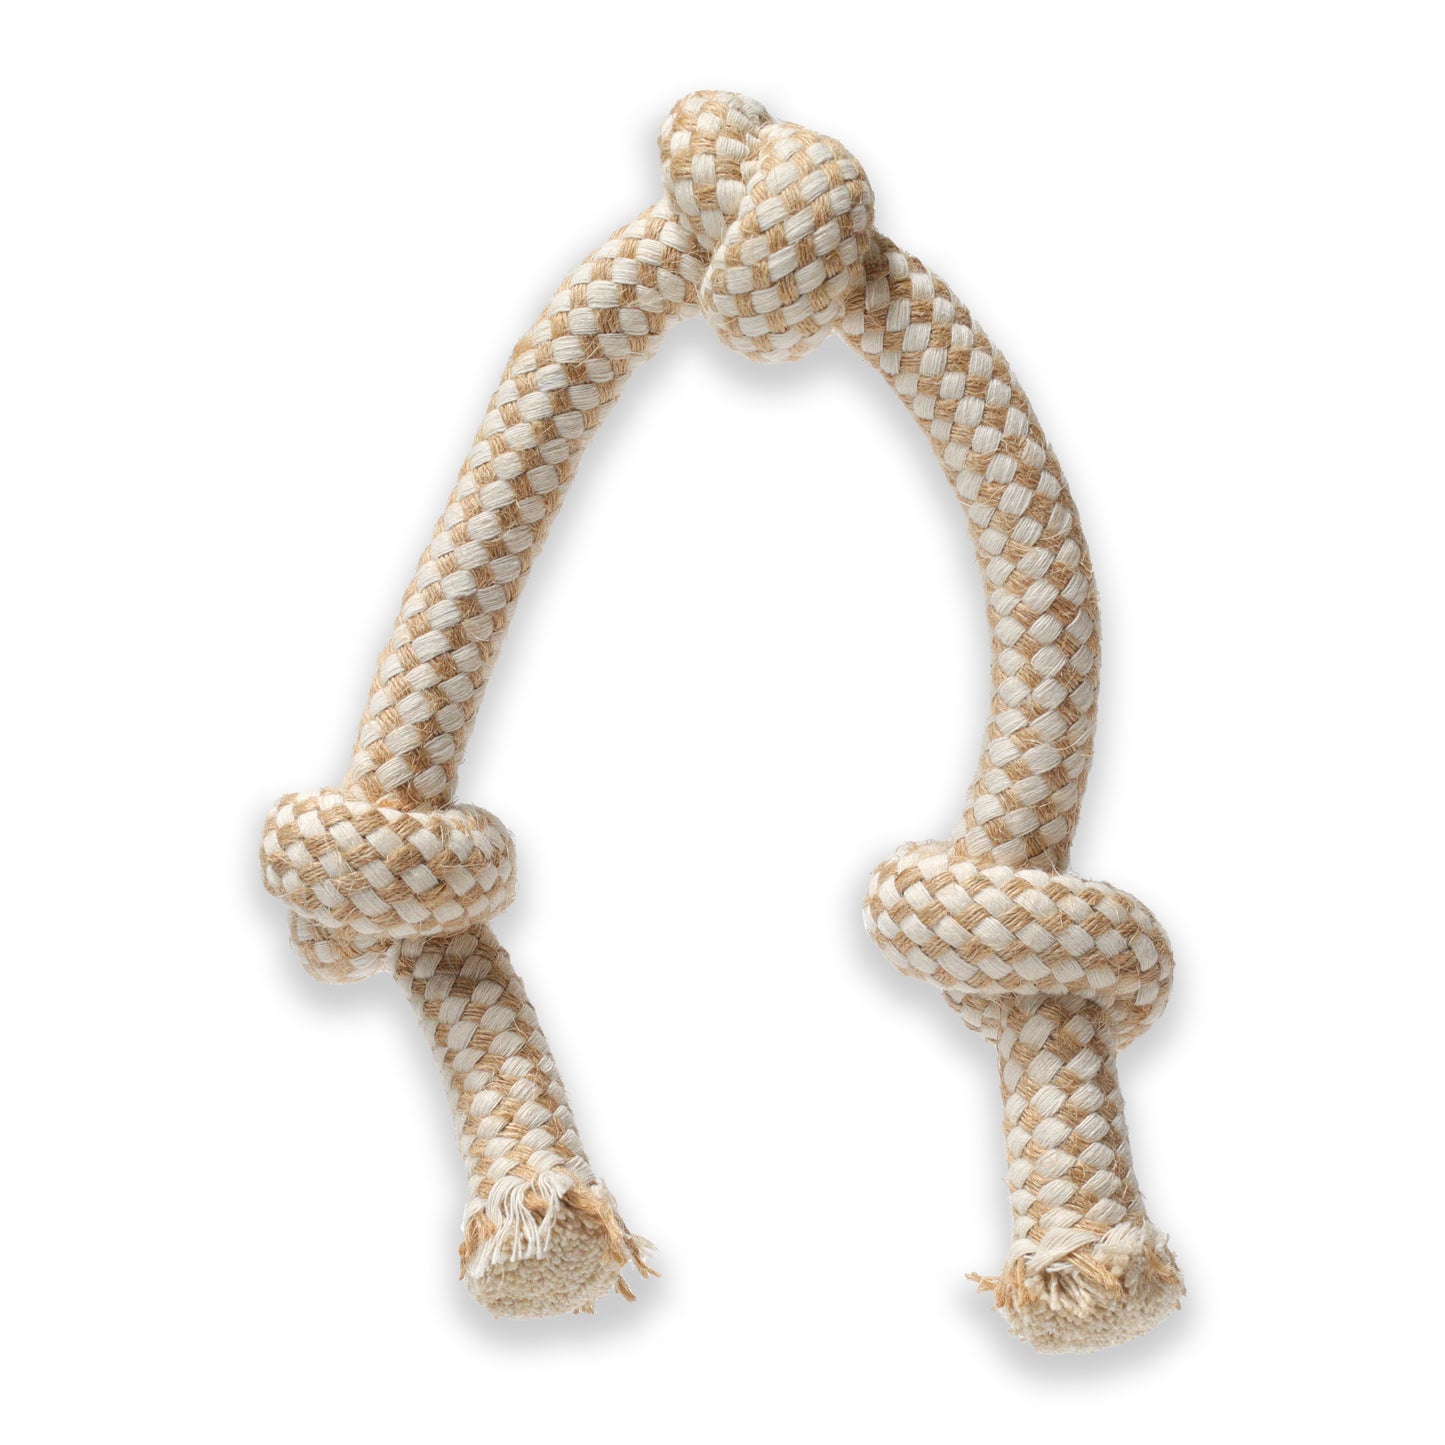 Triple Knot Rope